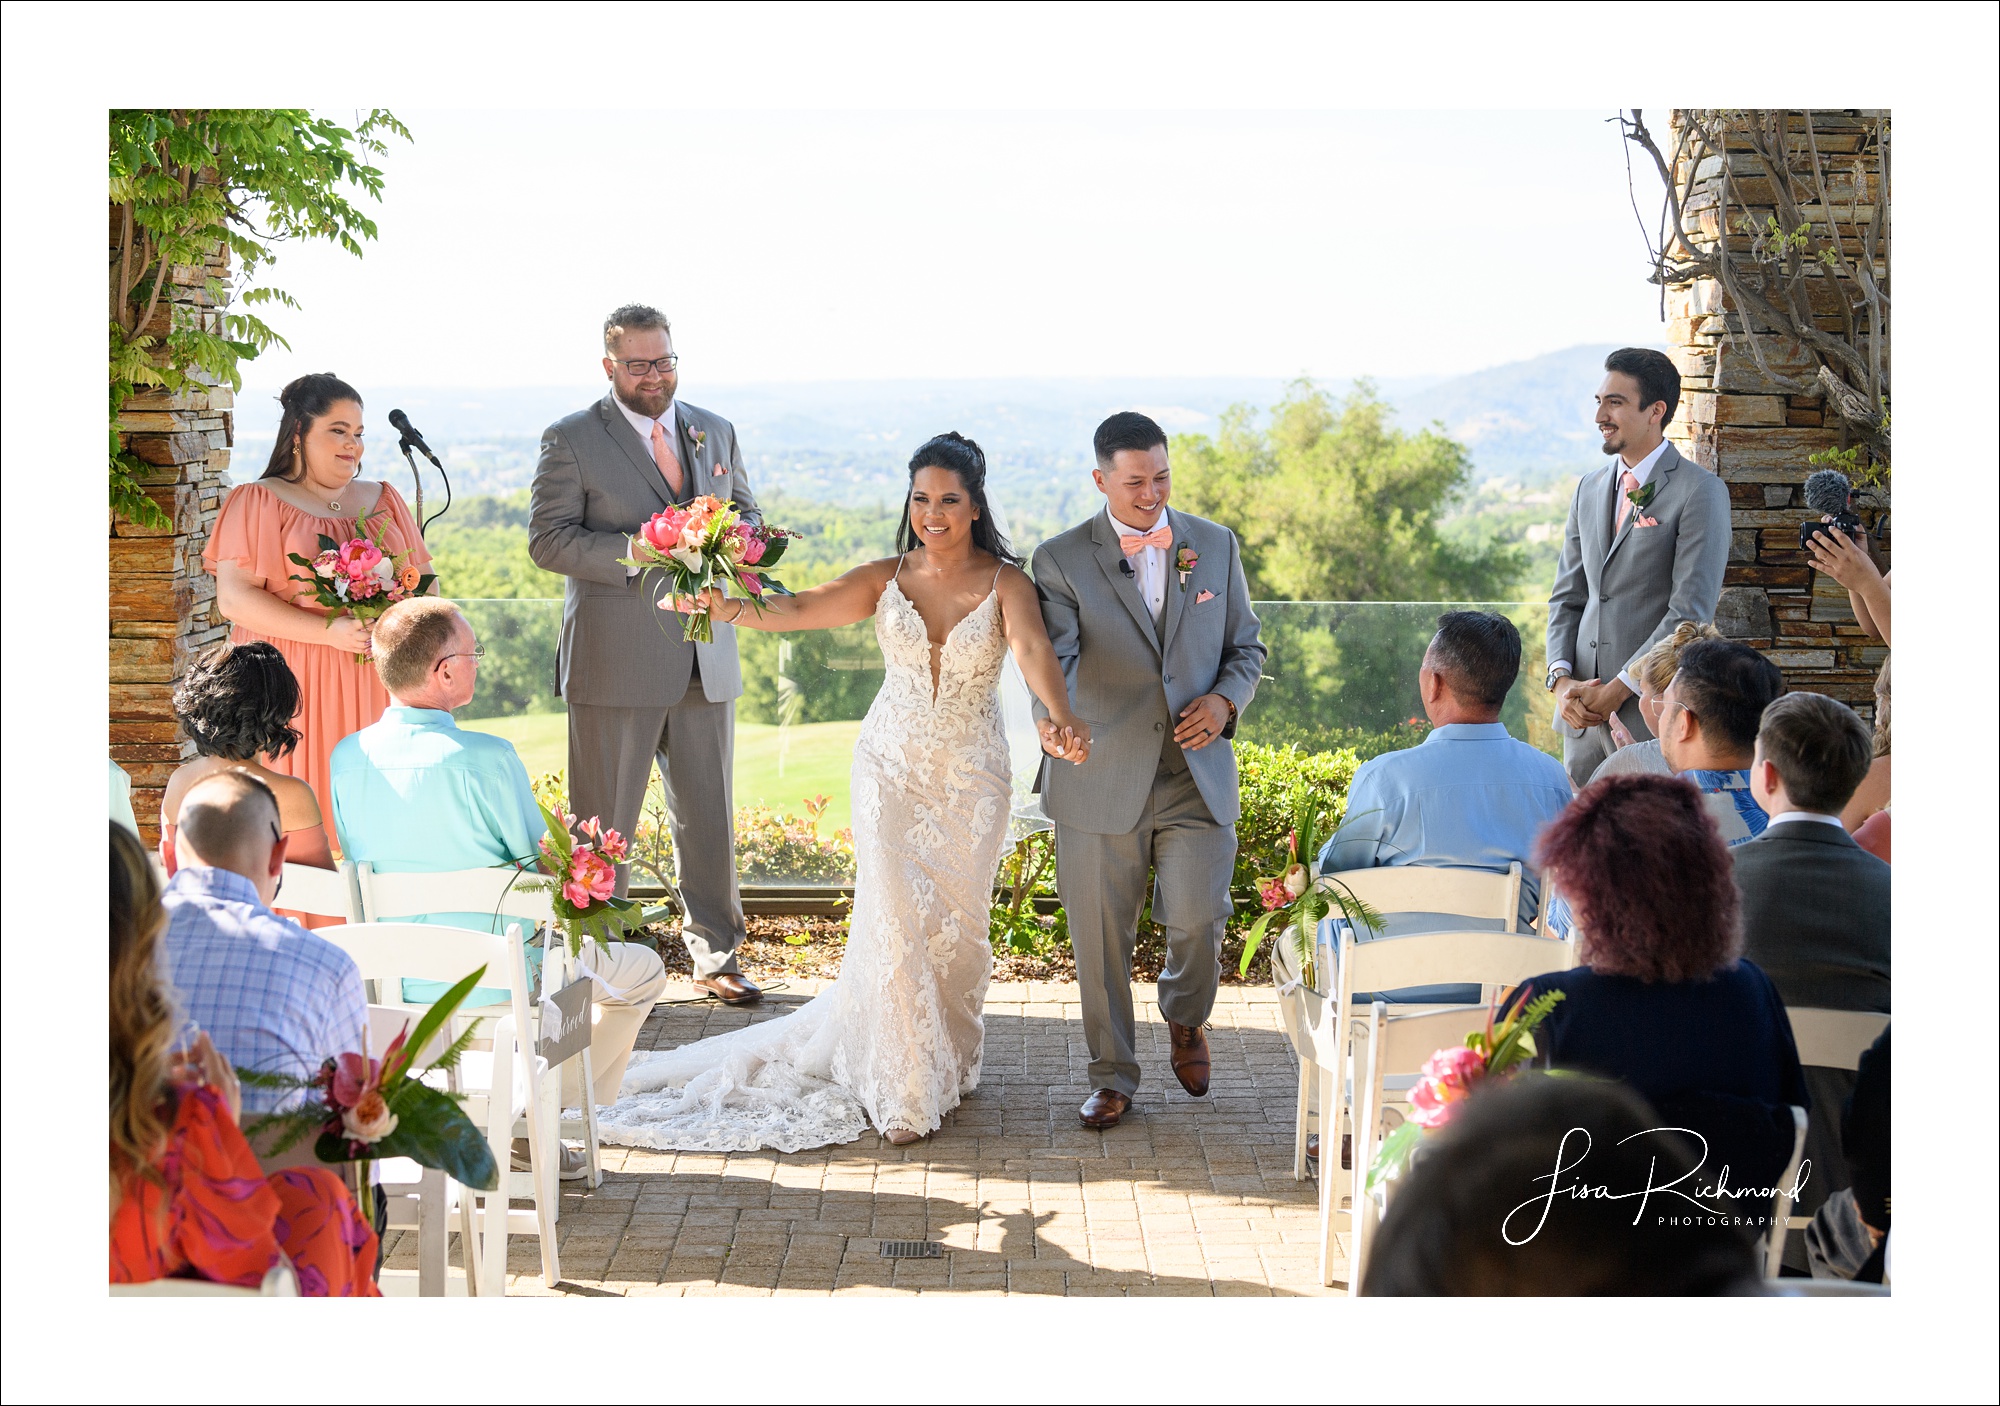 Anja and Nick celebrate their wedding day at Serrano Country Club